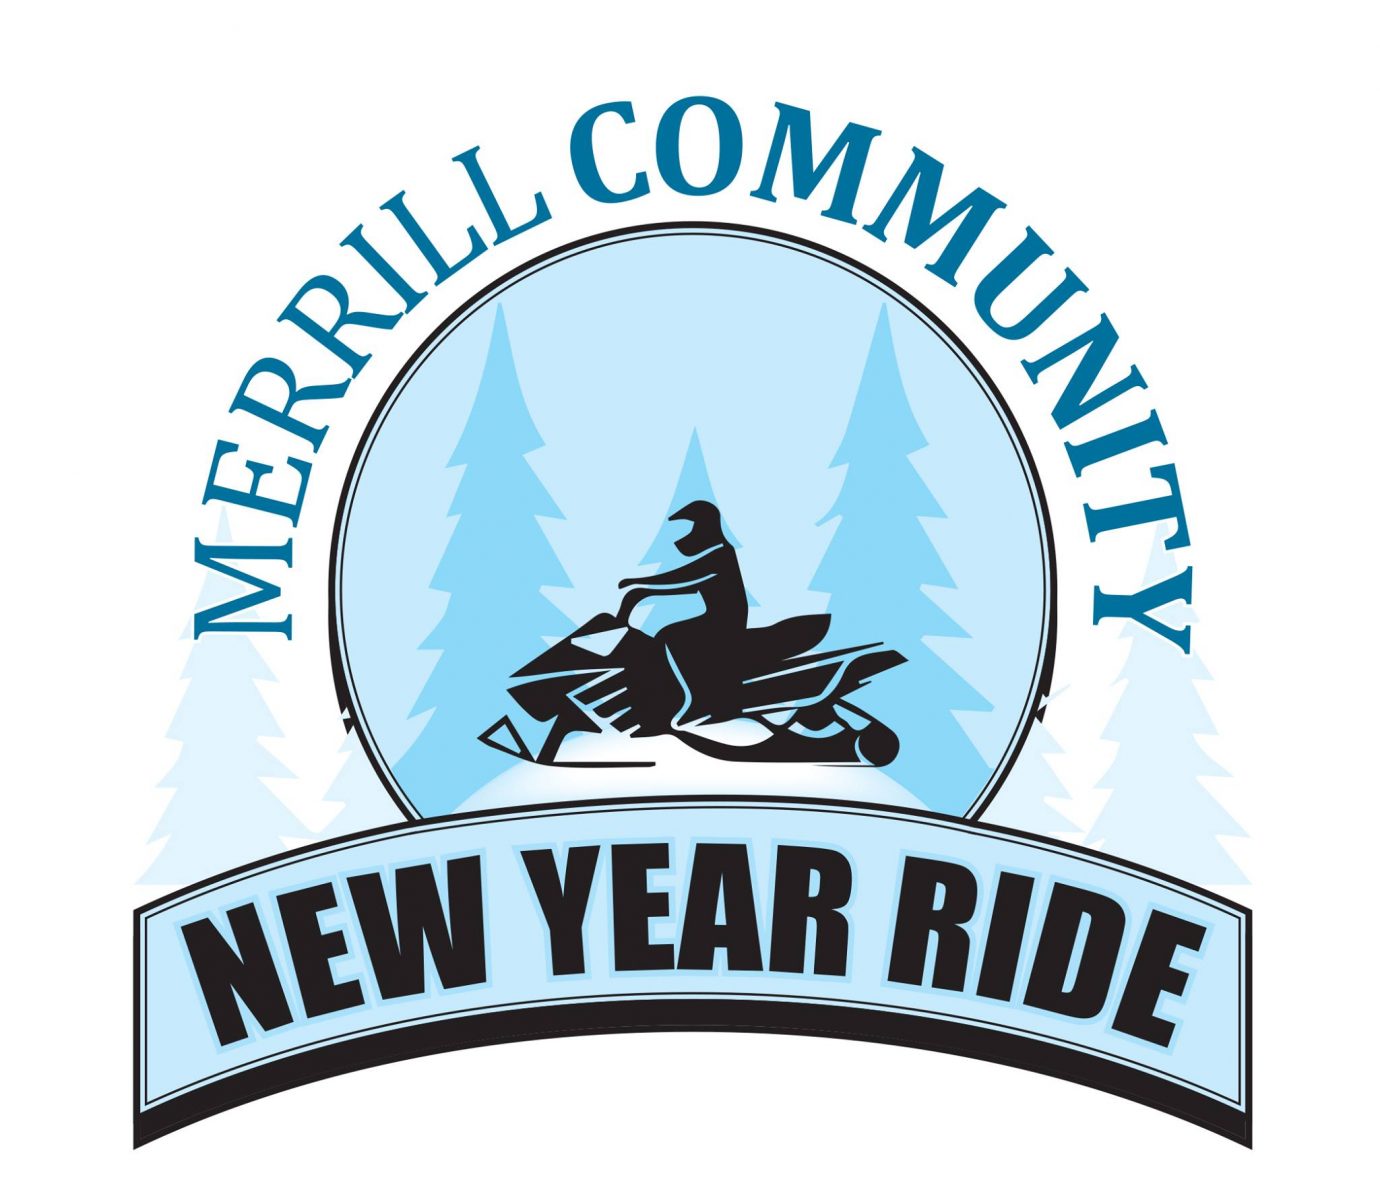 Community New Year Ride gearing up for third year